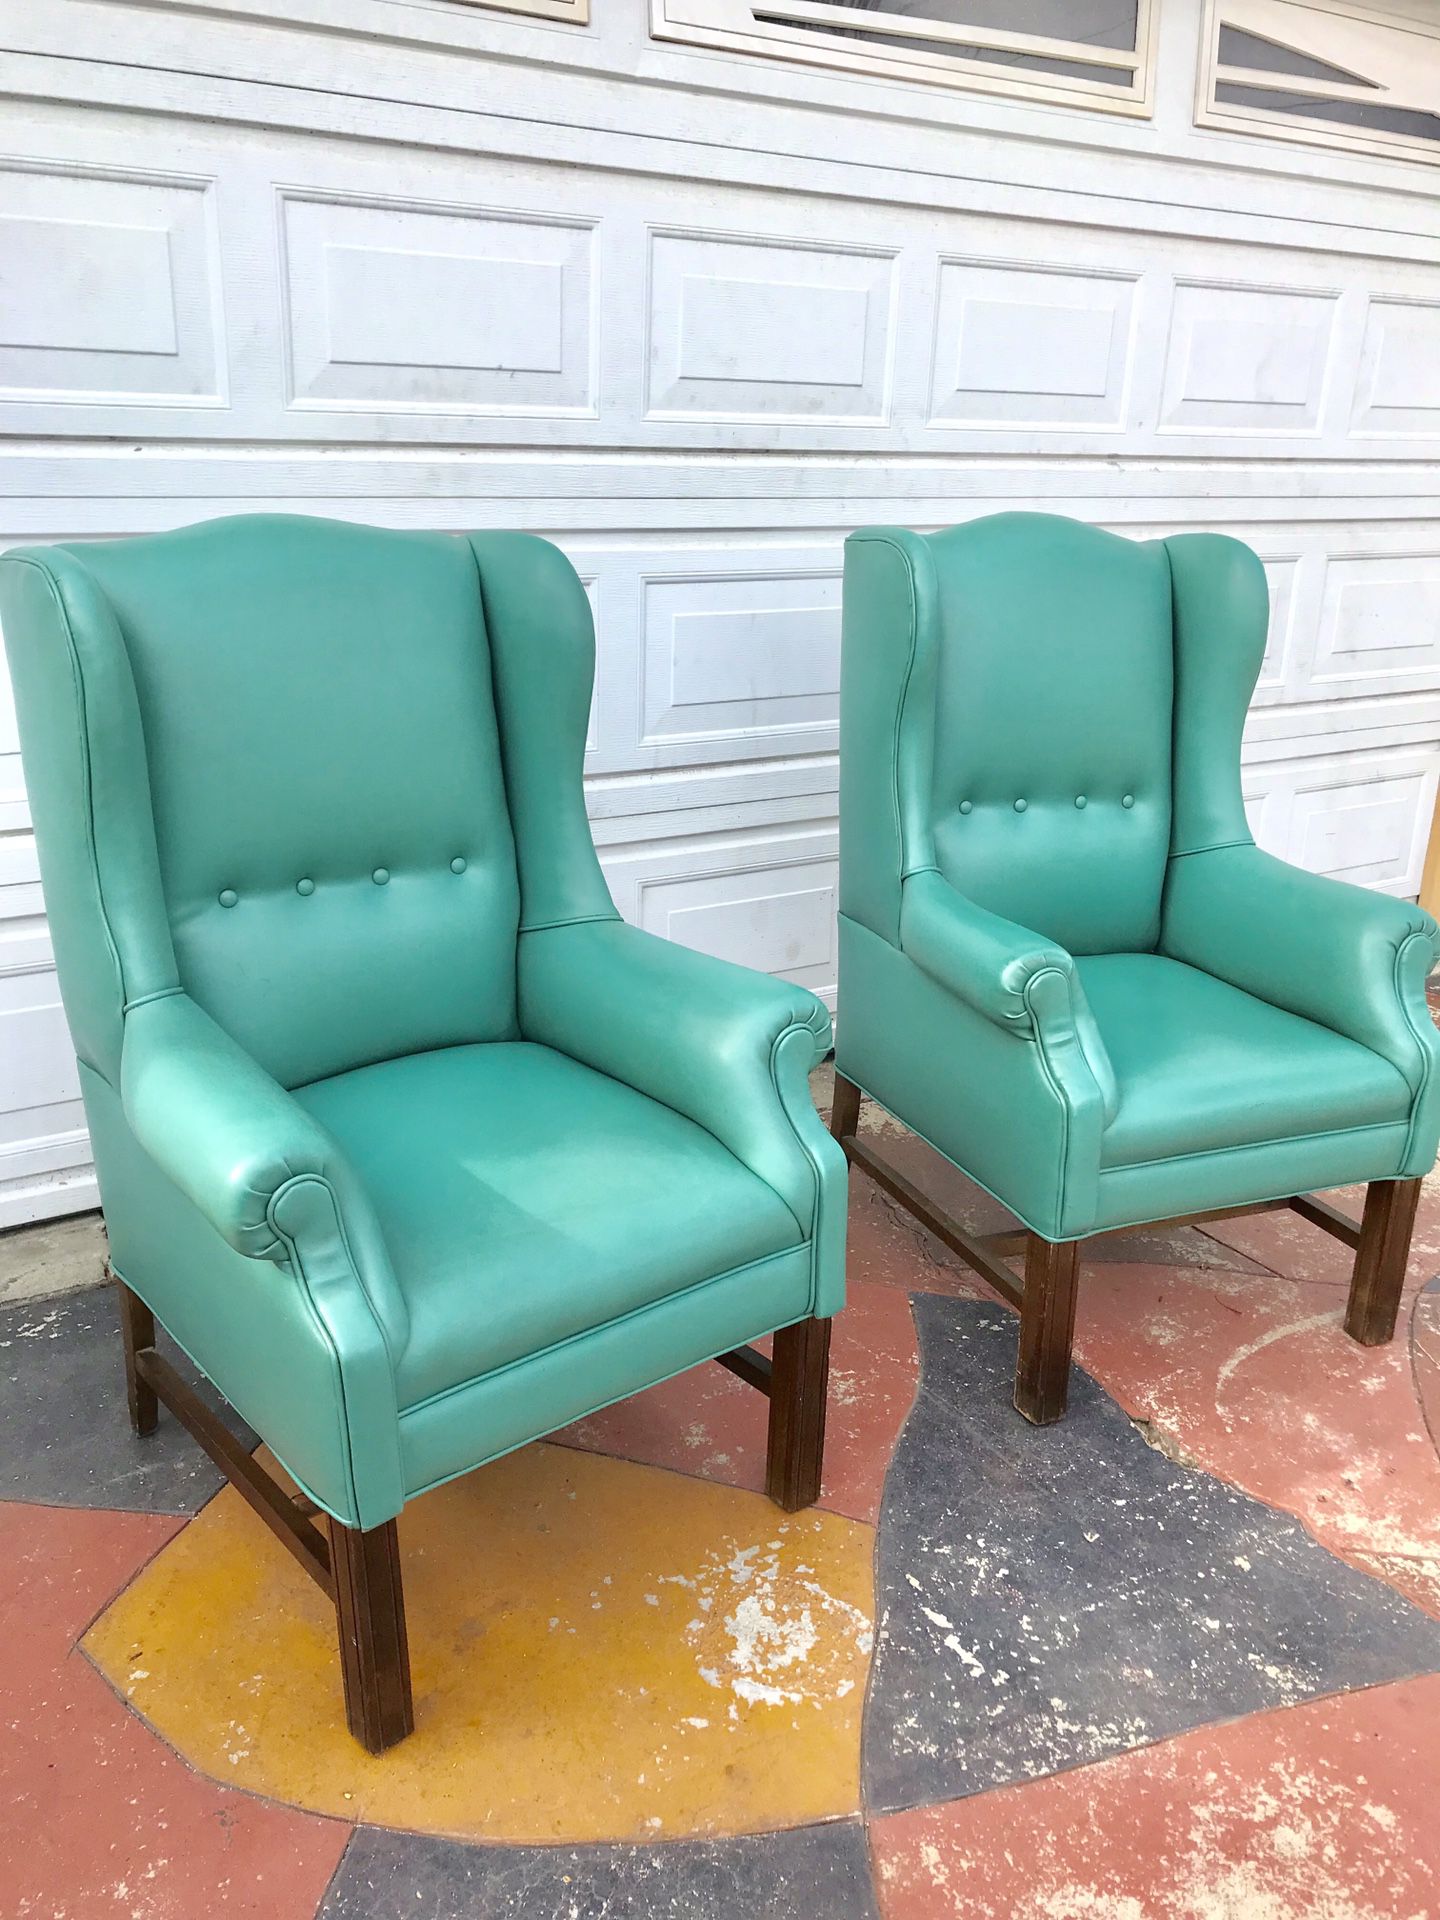 Vintage style wingback chairs